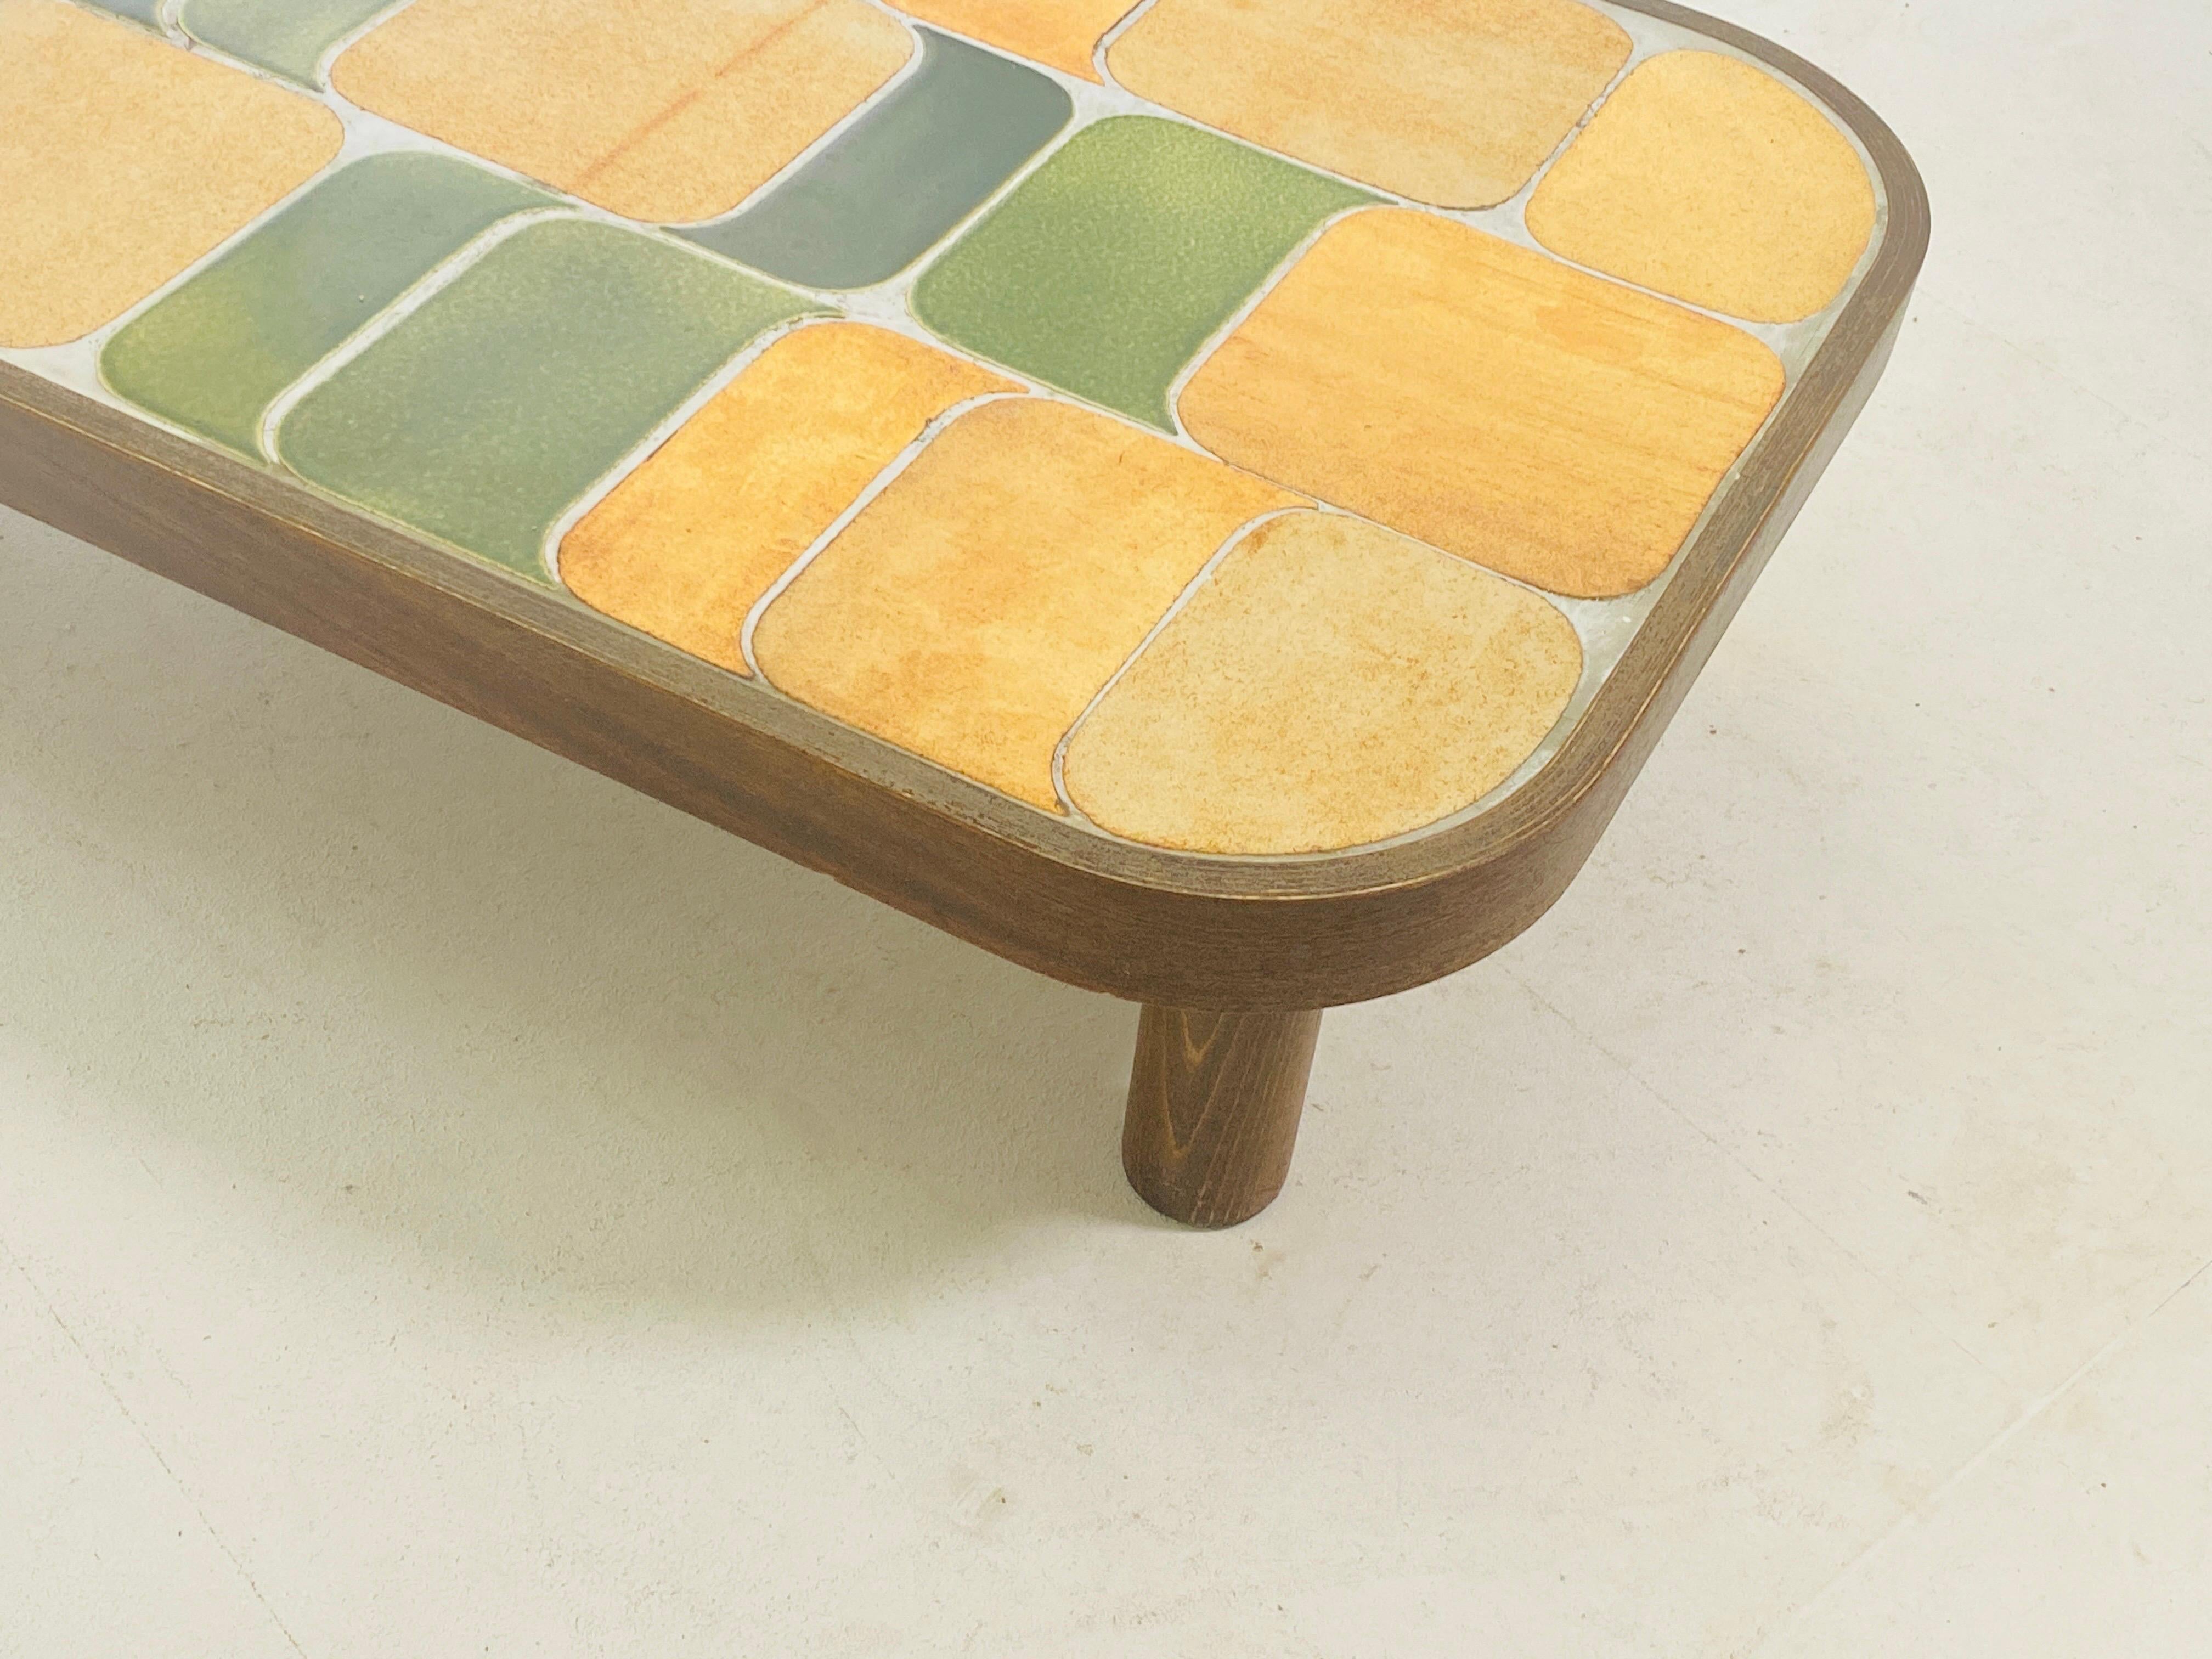 French Roger Capron ‘Shogun’ Coffee Table in Ceramic France 1970 Brown and Green Color